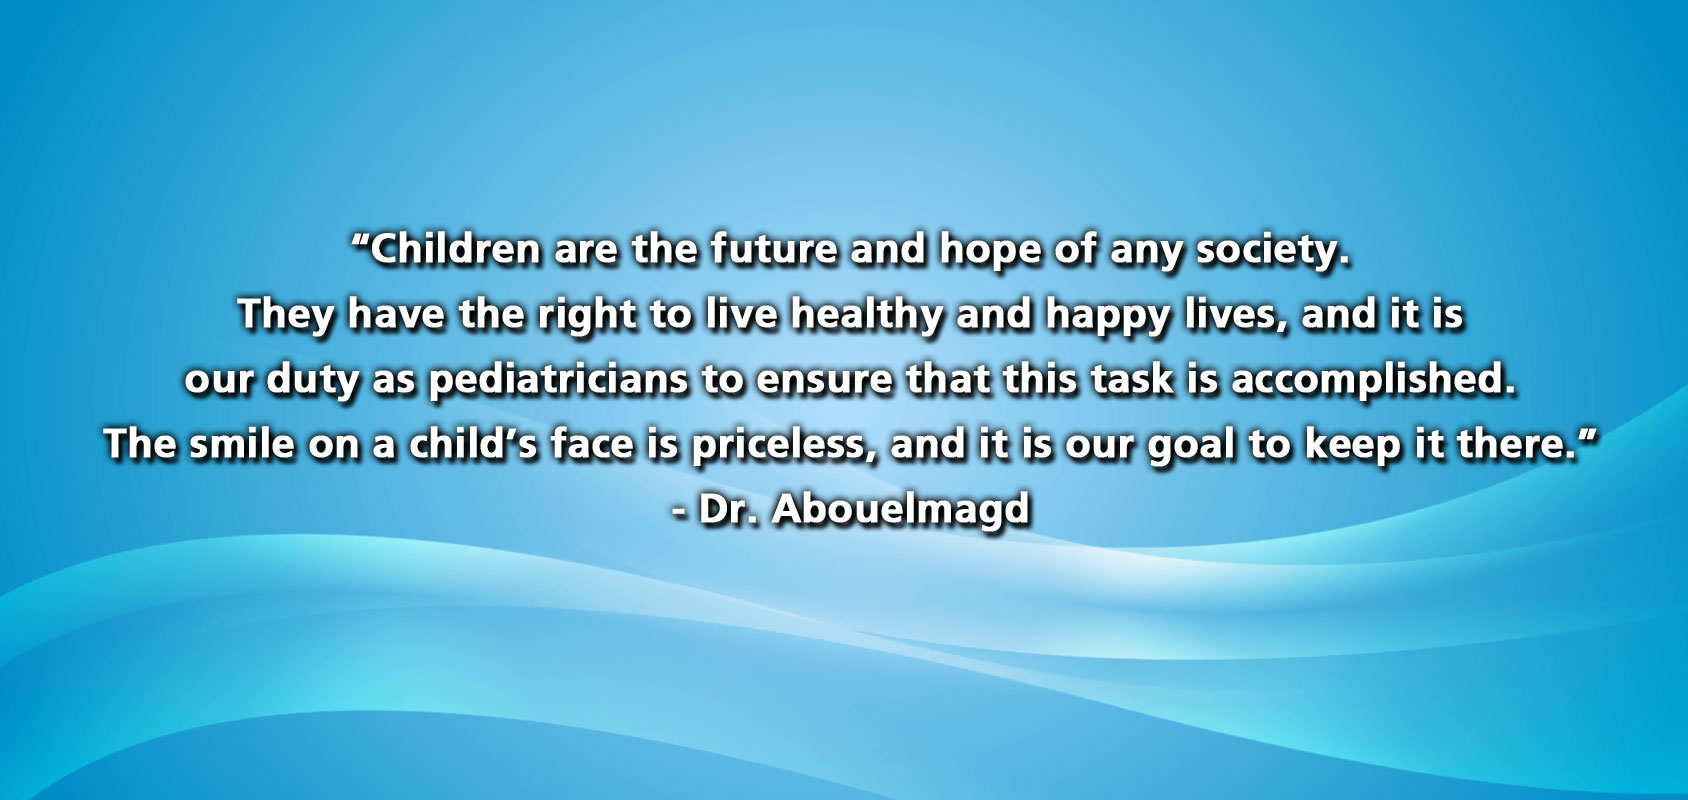 Quote by Dr. Abouelmagd